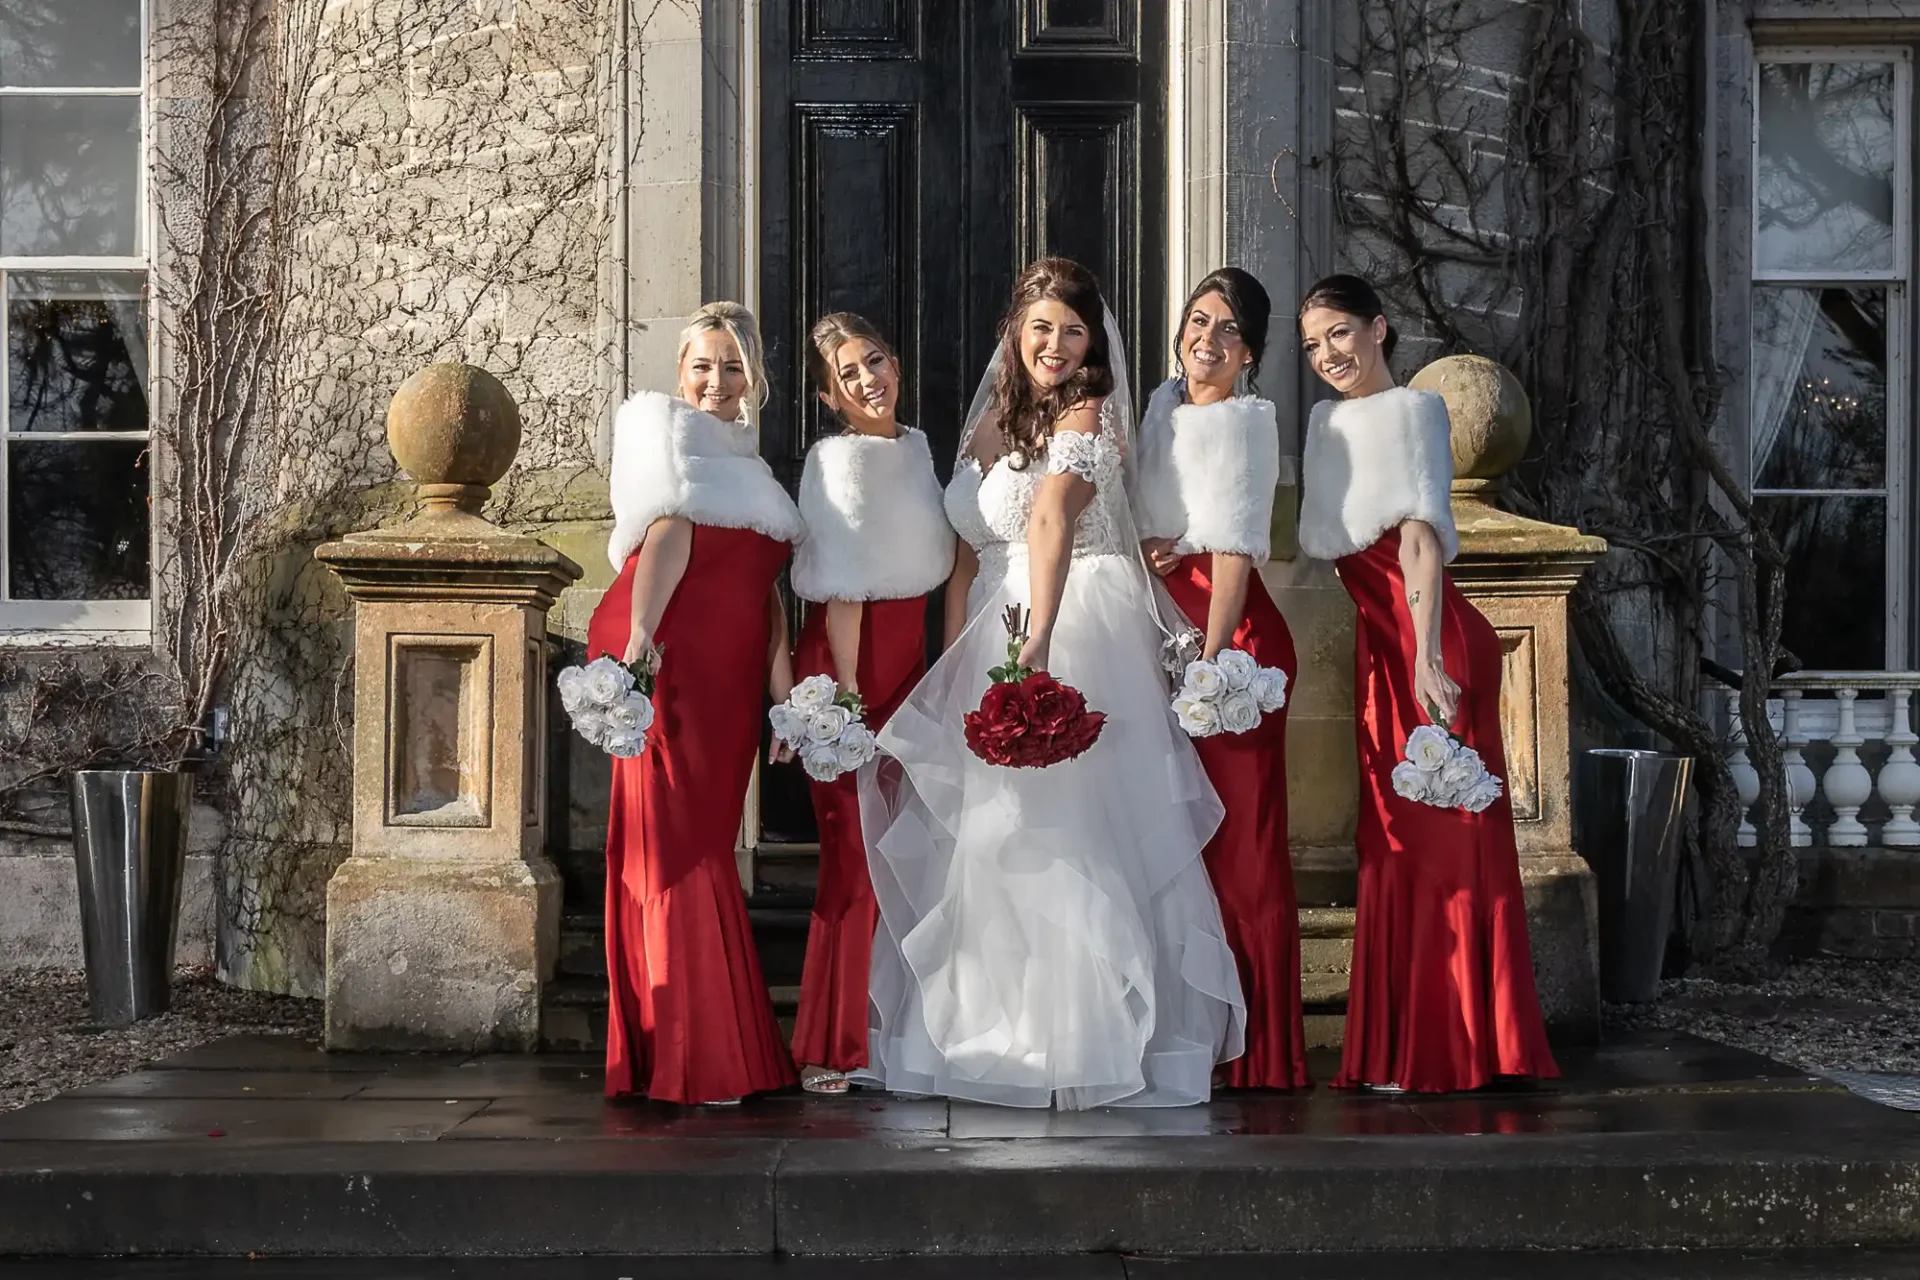 A bride and four bridesmaids posing in front of a building, wearing red dresses with white stoles and holding bouquets.